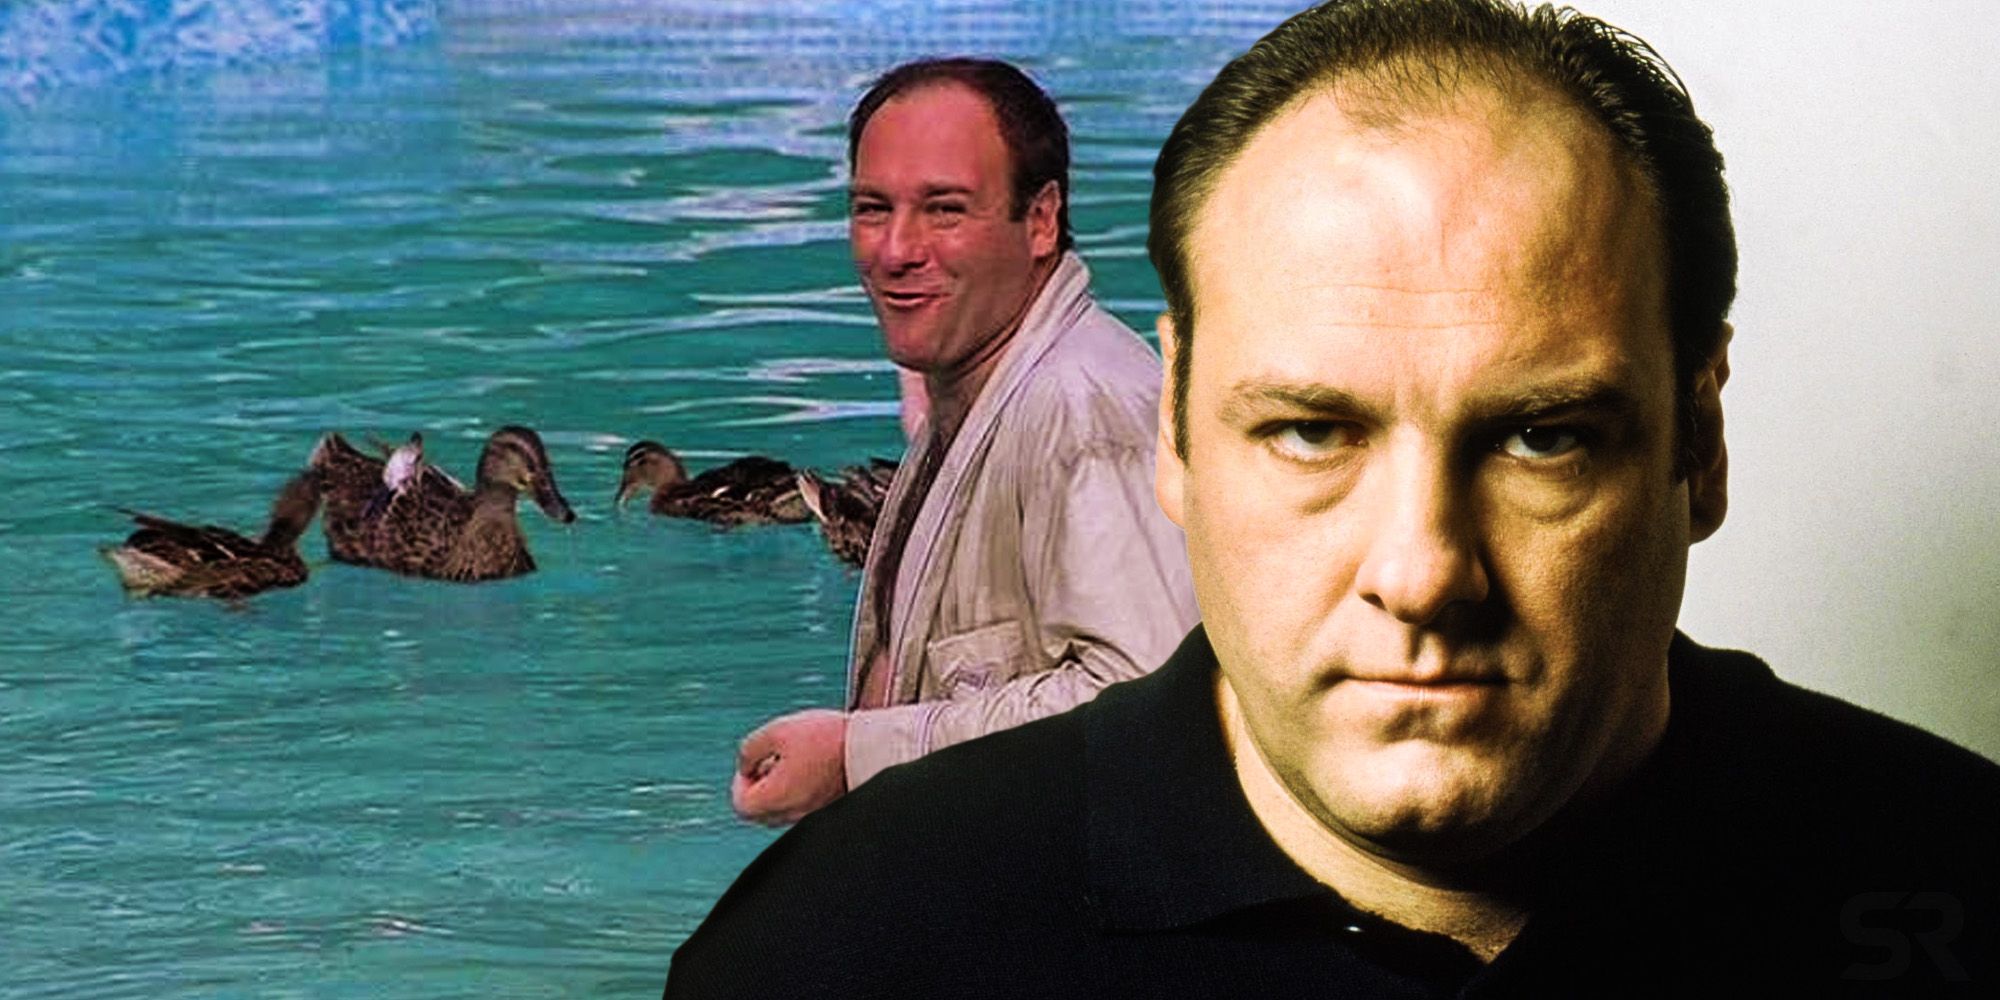 The Sopranos All 6 Animal Symbols For Tony (& What They Mean)